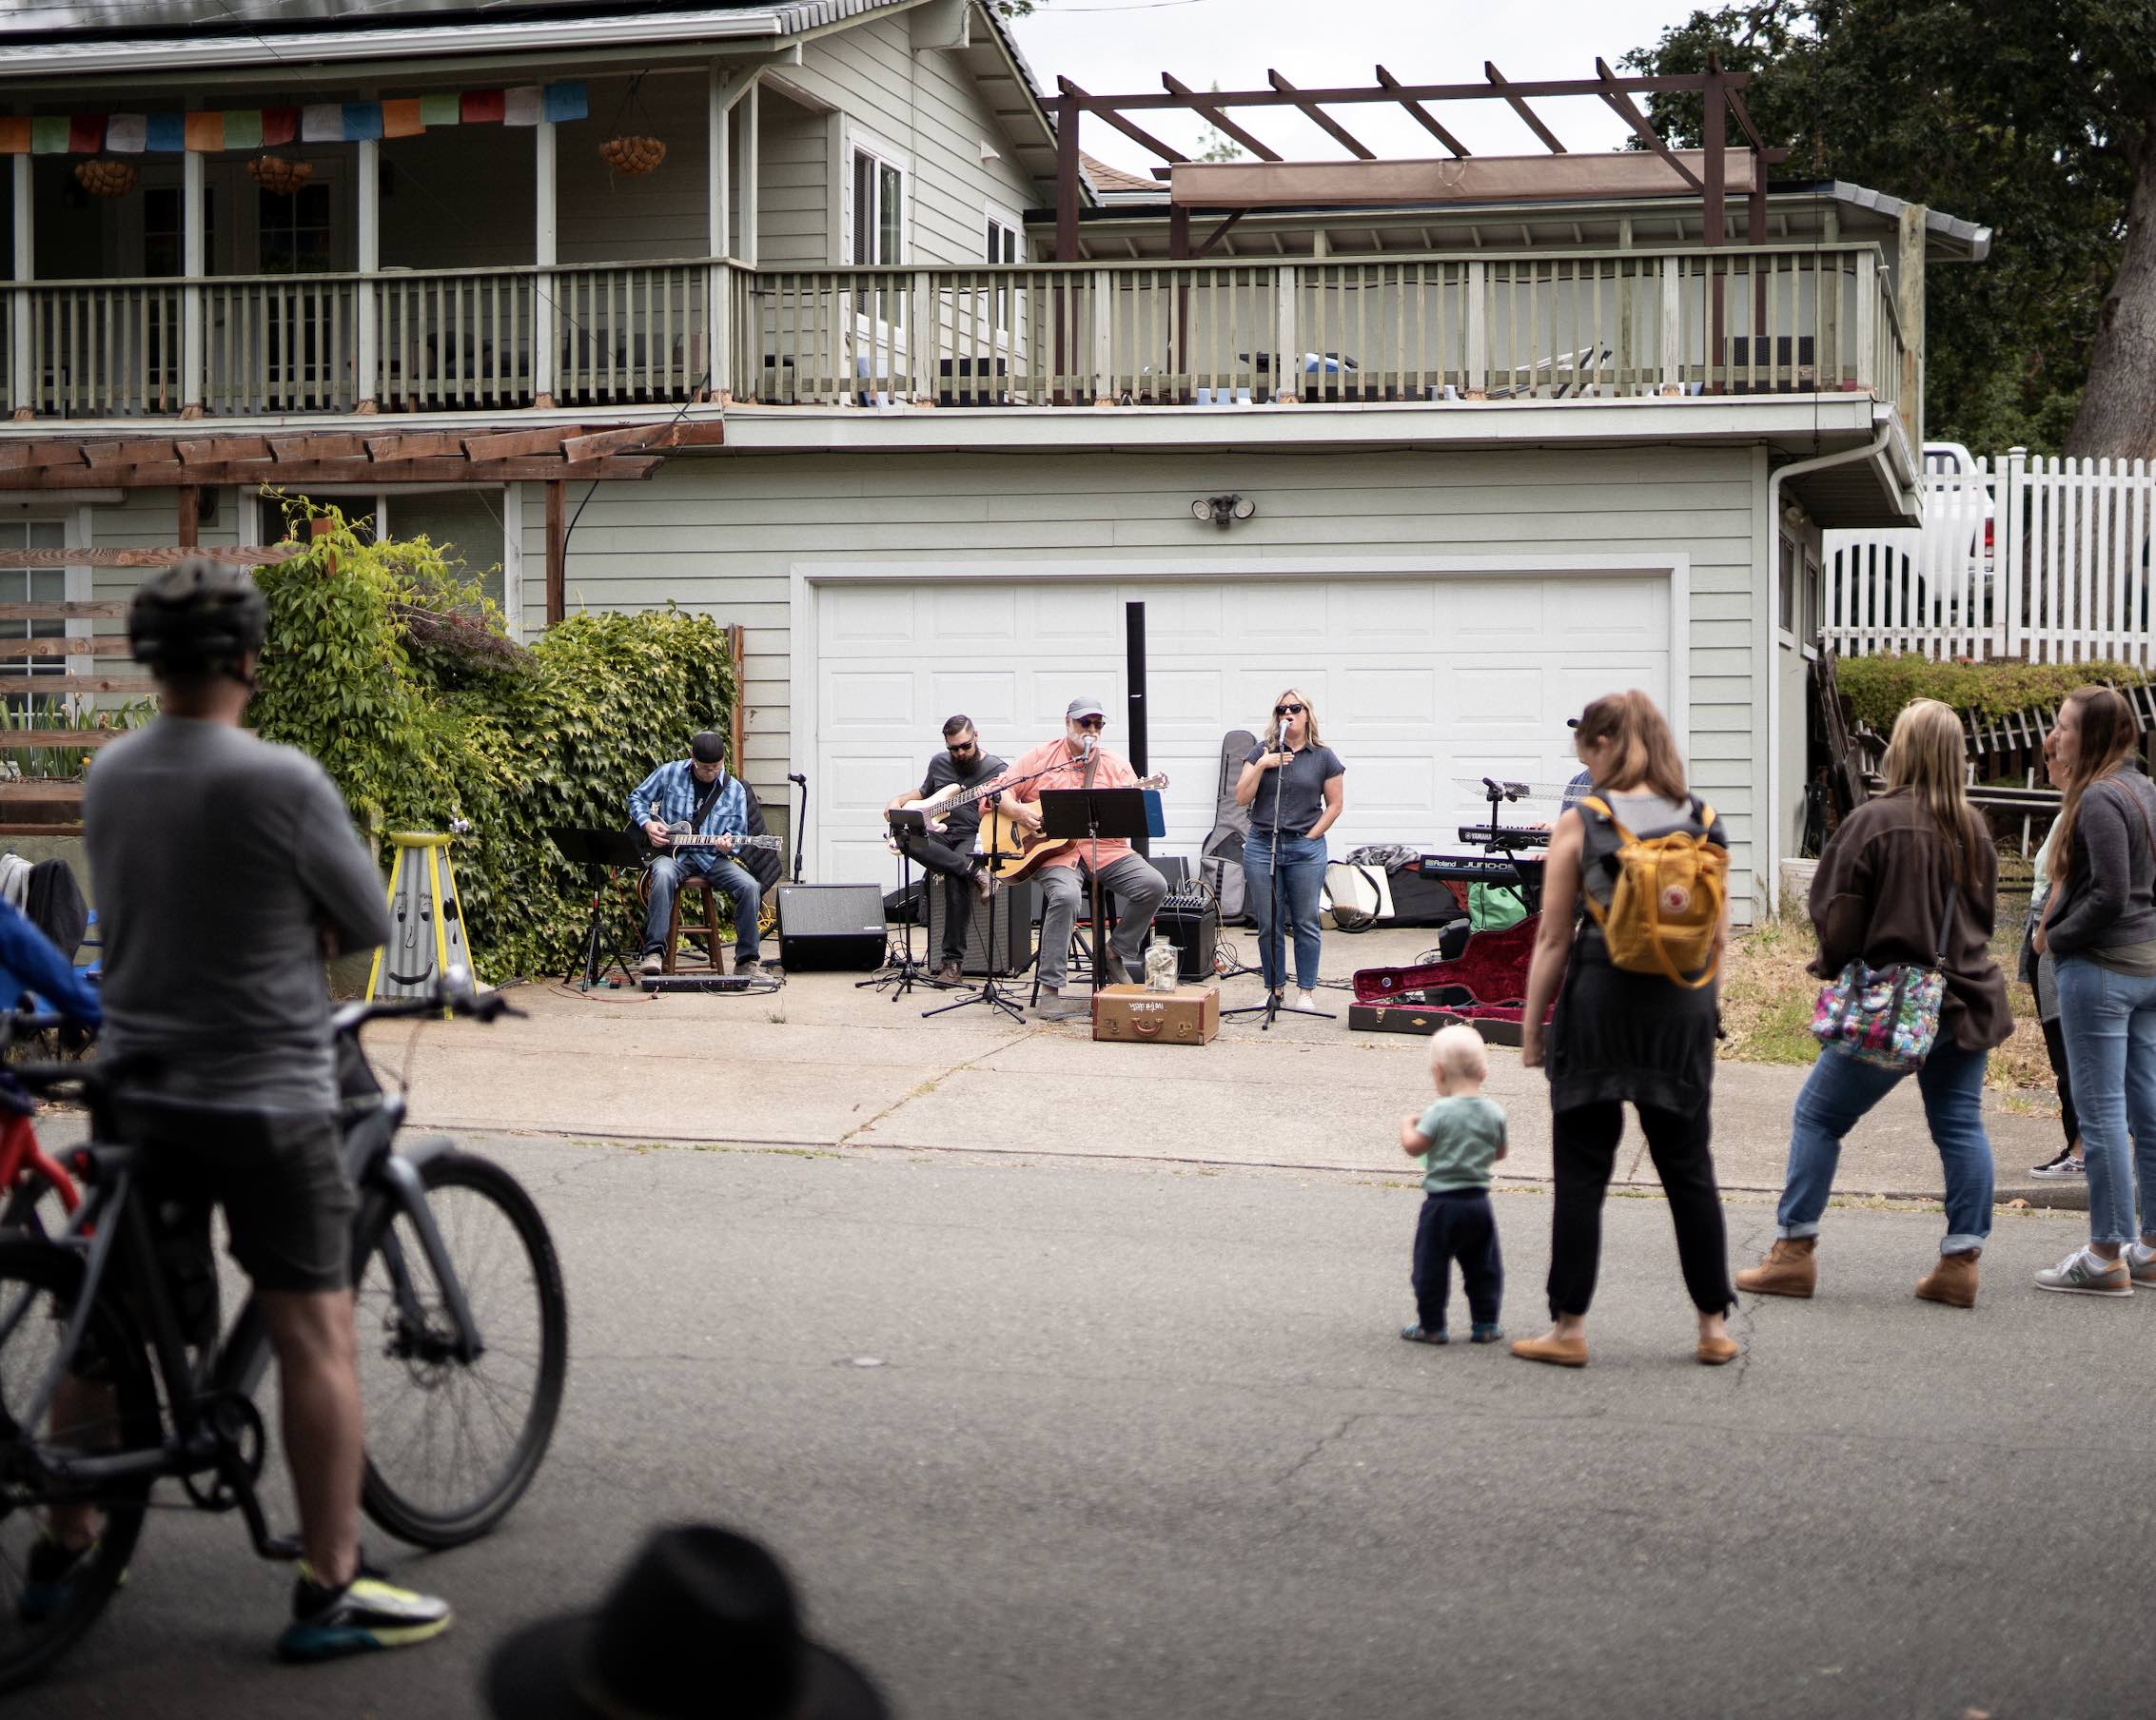 Bikers and pedestrians gathered around a driveway where a band is playing live music